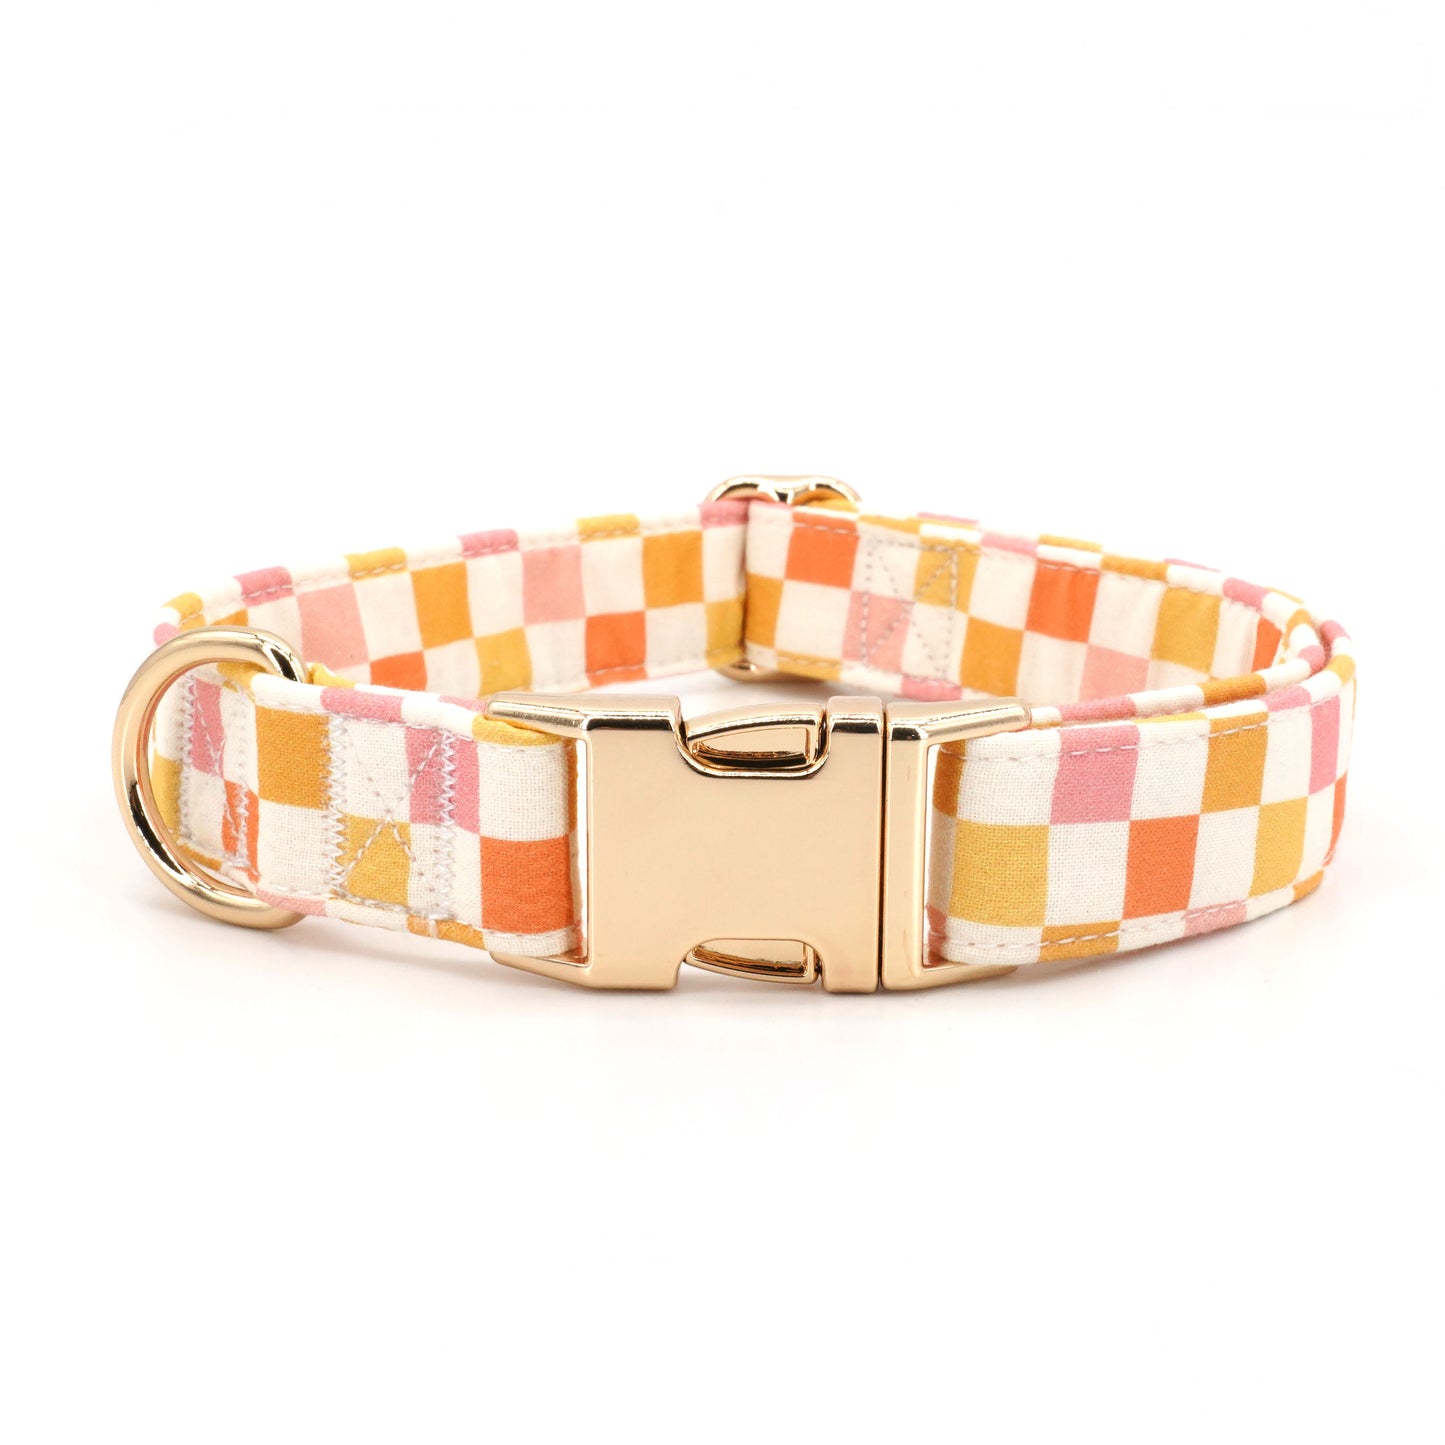 Creamsicle Collar, Leash, and Flower